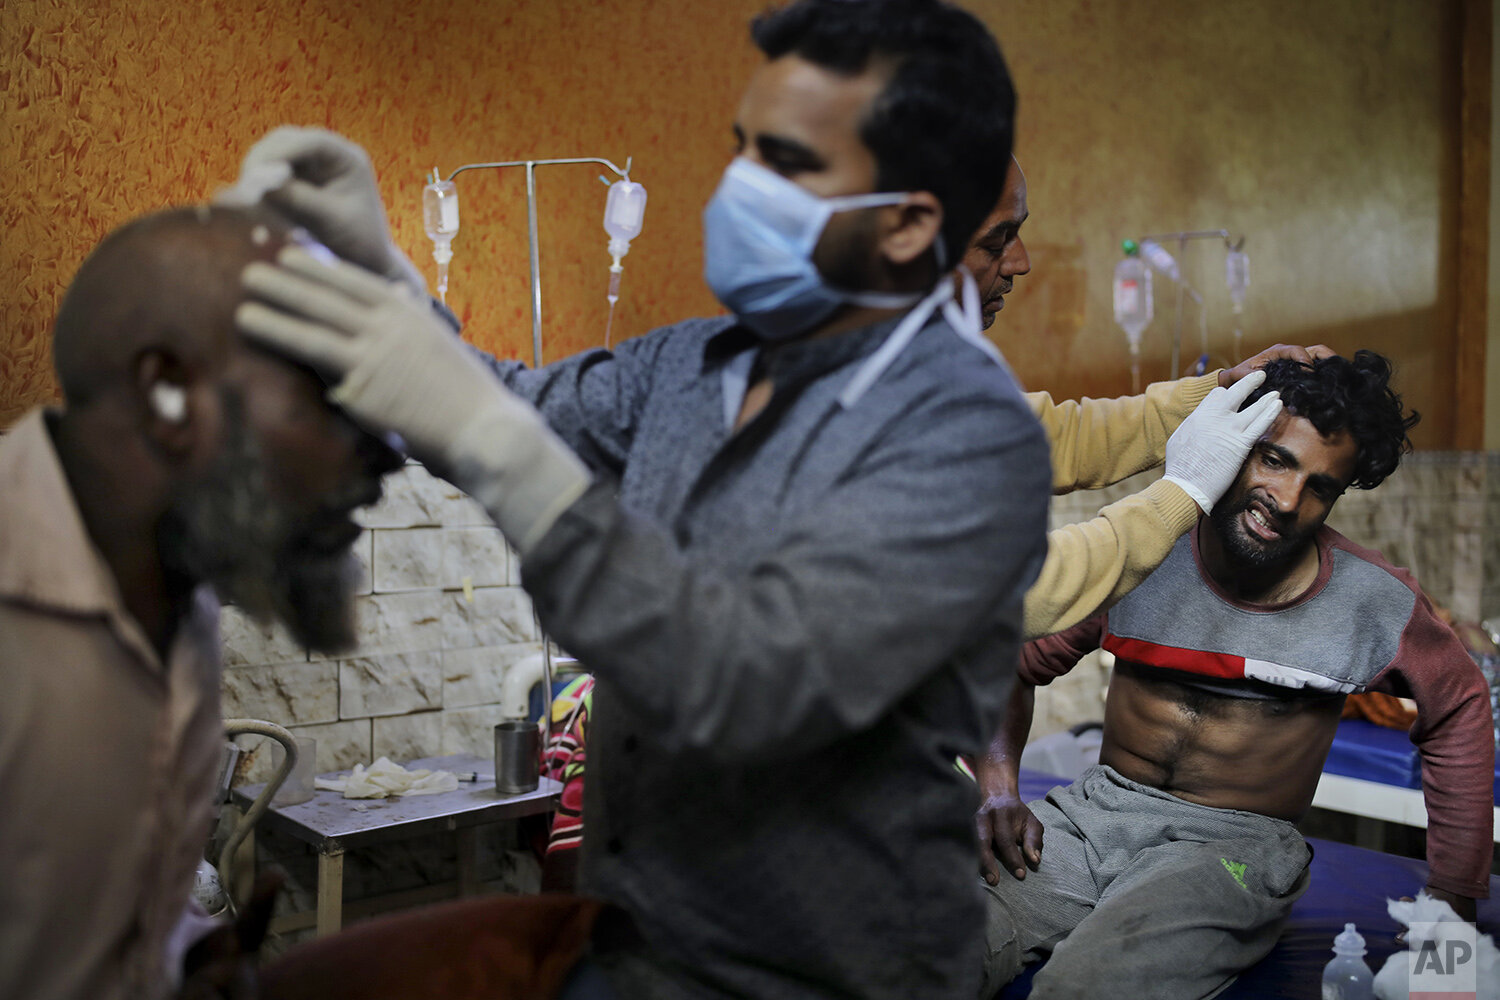  In this Friday, Feb. 28, 2020 photo, paramedics tend to the wounds of Mehfooz Umar, left, and Mohammad Afzal, right, at Al-Hind hospital in Old Mustafabad neighborhood of New Delhi, India. The hospital in the riot-torn neighborhood turned from a com